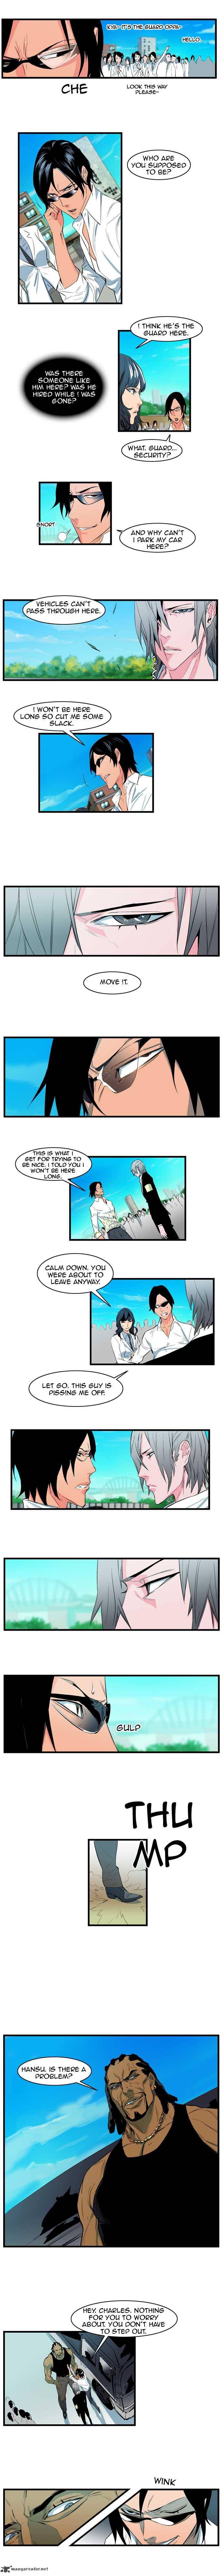 Noblesse Chapter 94 Page 4